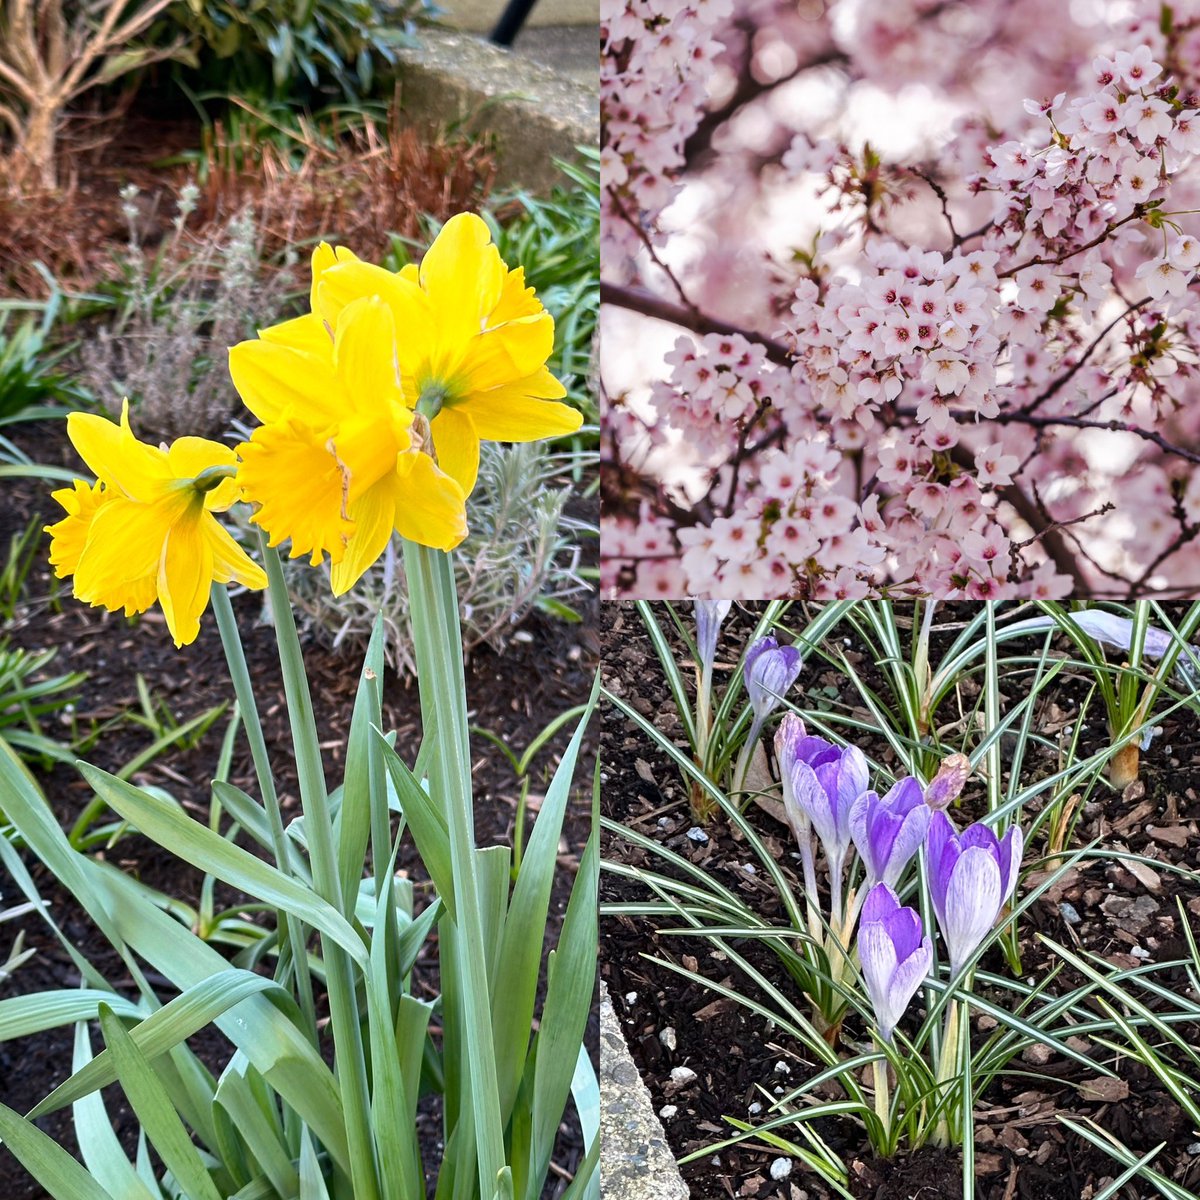 Spring has definitely sprung in #Vancouver. And we’re in for a weekend of sunshine and high temps too. Sending good vibes to everyone. #spring #bc #westvancouver #northvancouver